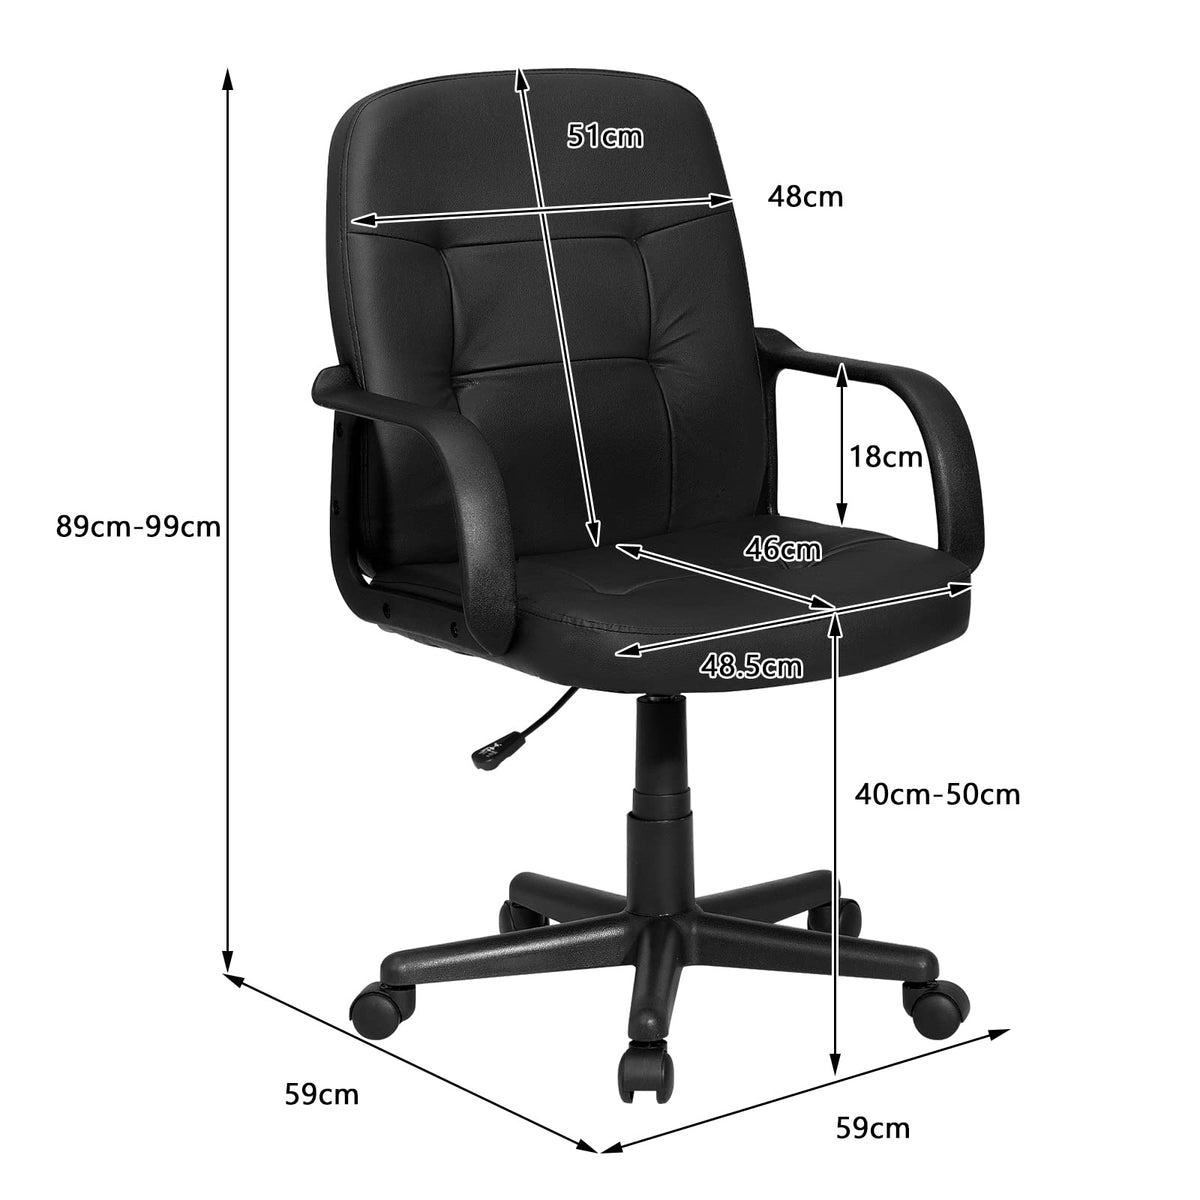 Giantex Mid-Back Executive Office Chair, PVC Leather Computer Chair w/Adjustable Height & Flexible Wheels